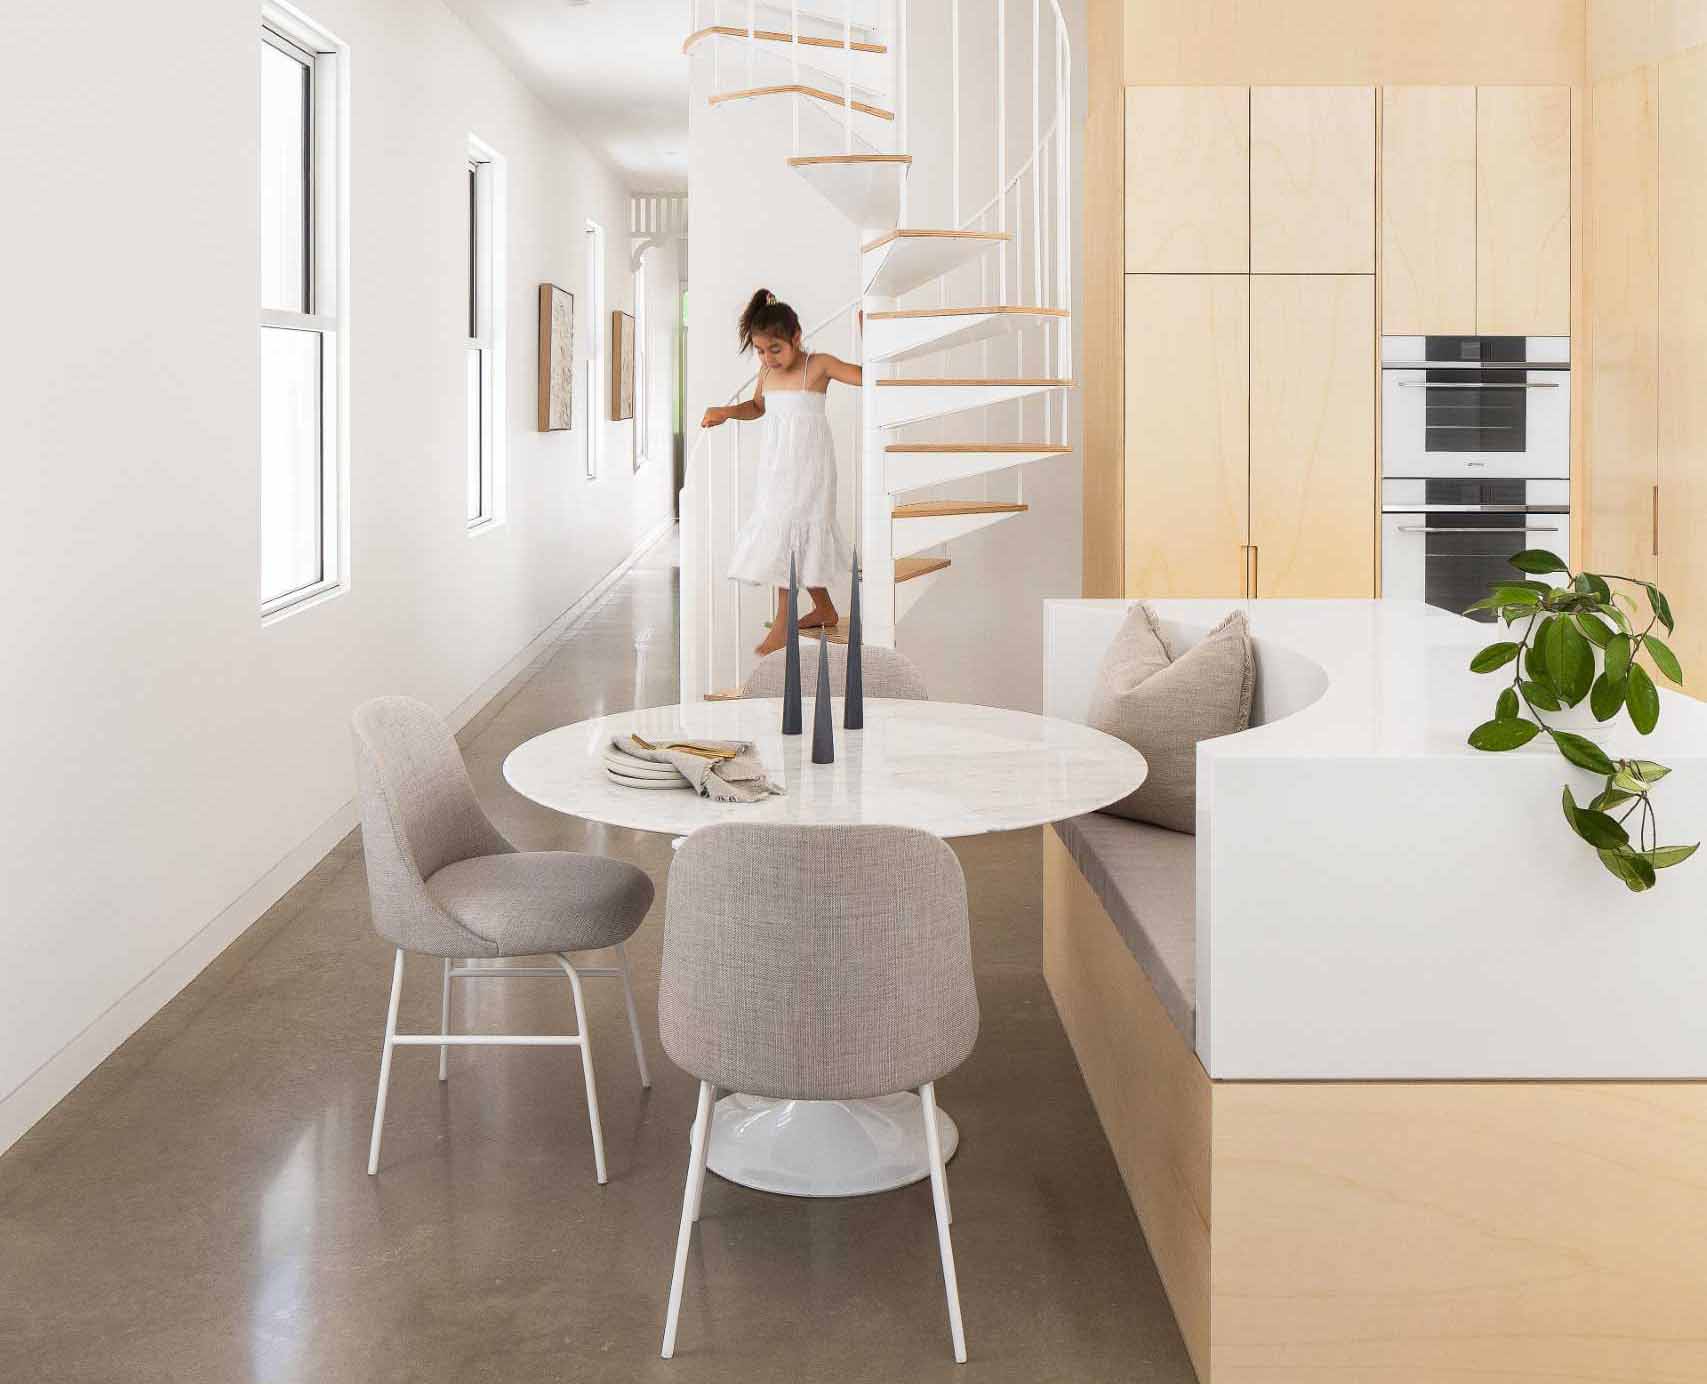 A modern wood and white kitchen with a floating shelf includes an island with built-in seating for the dining area.